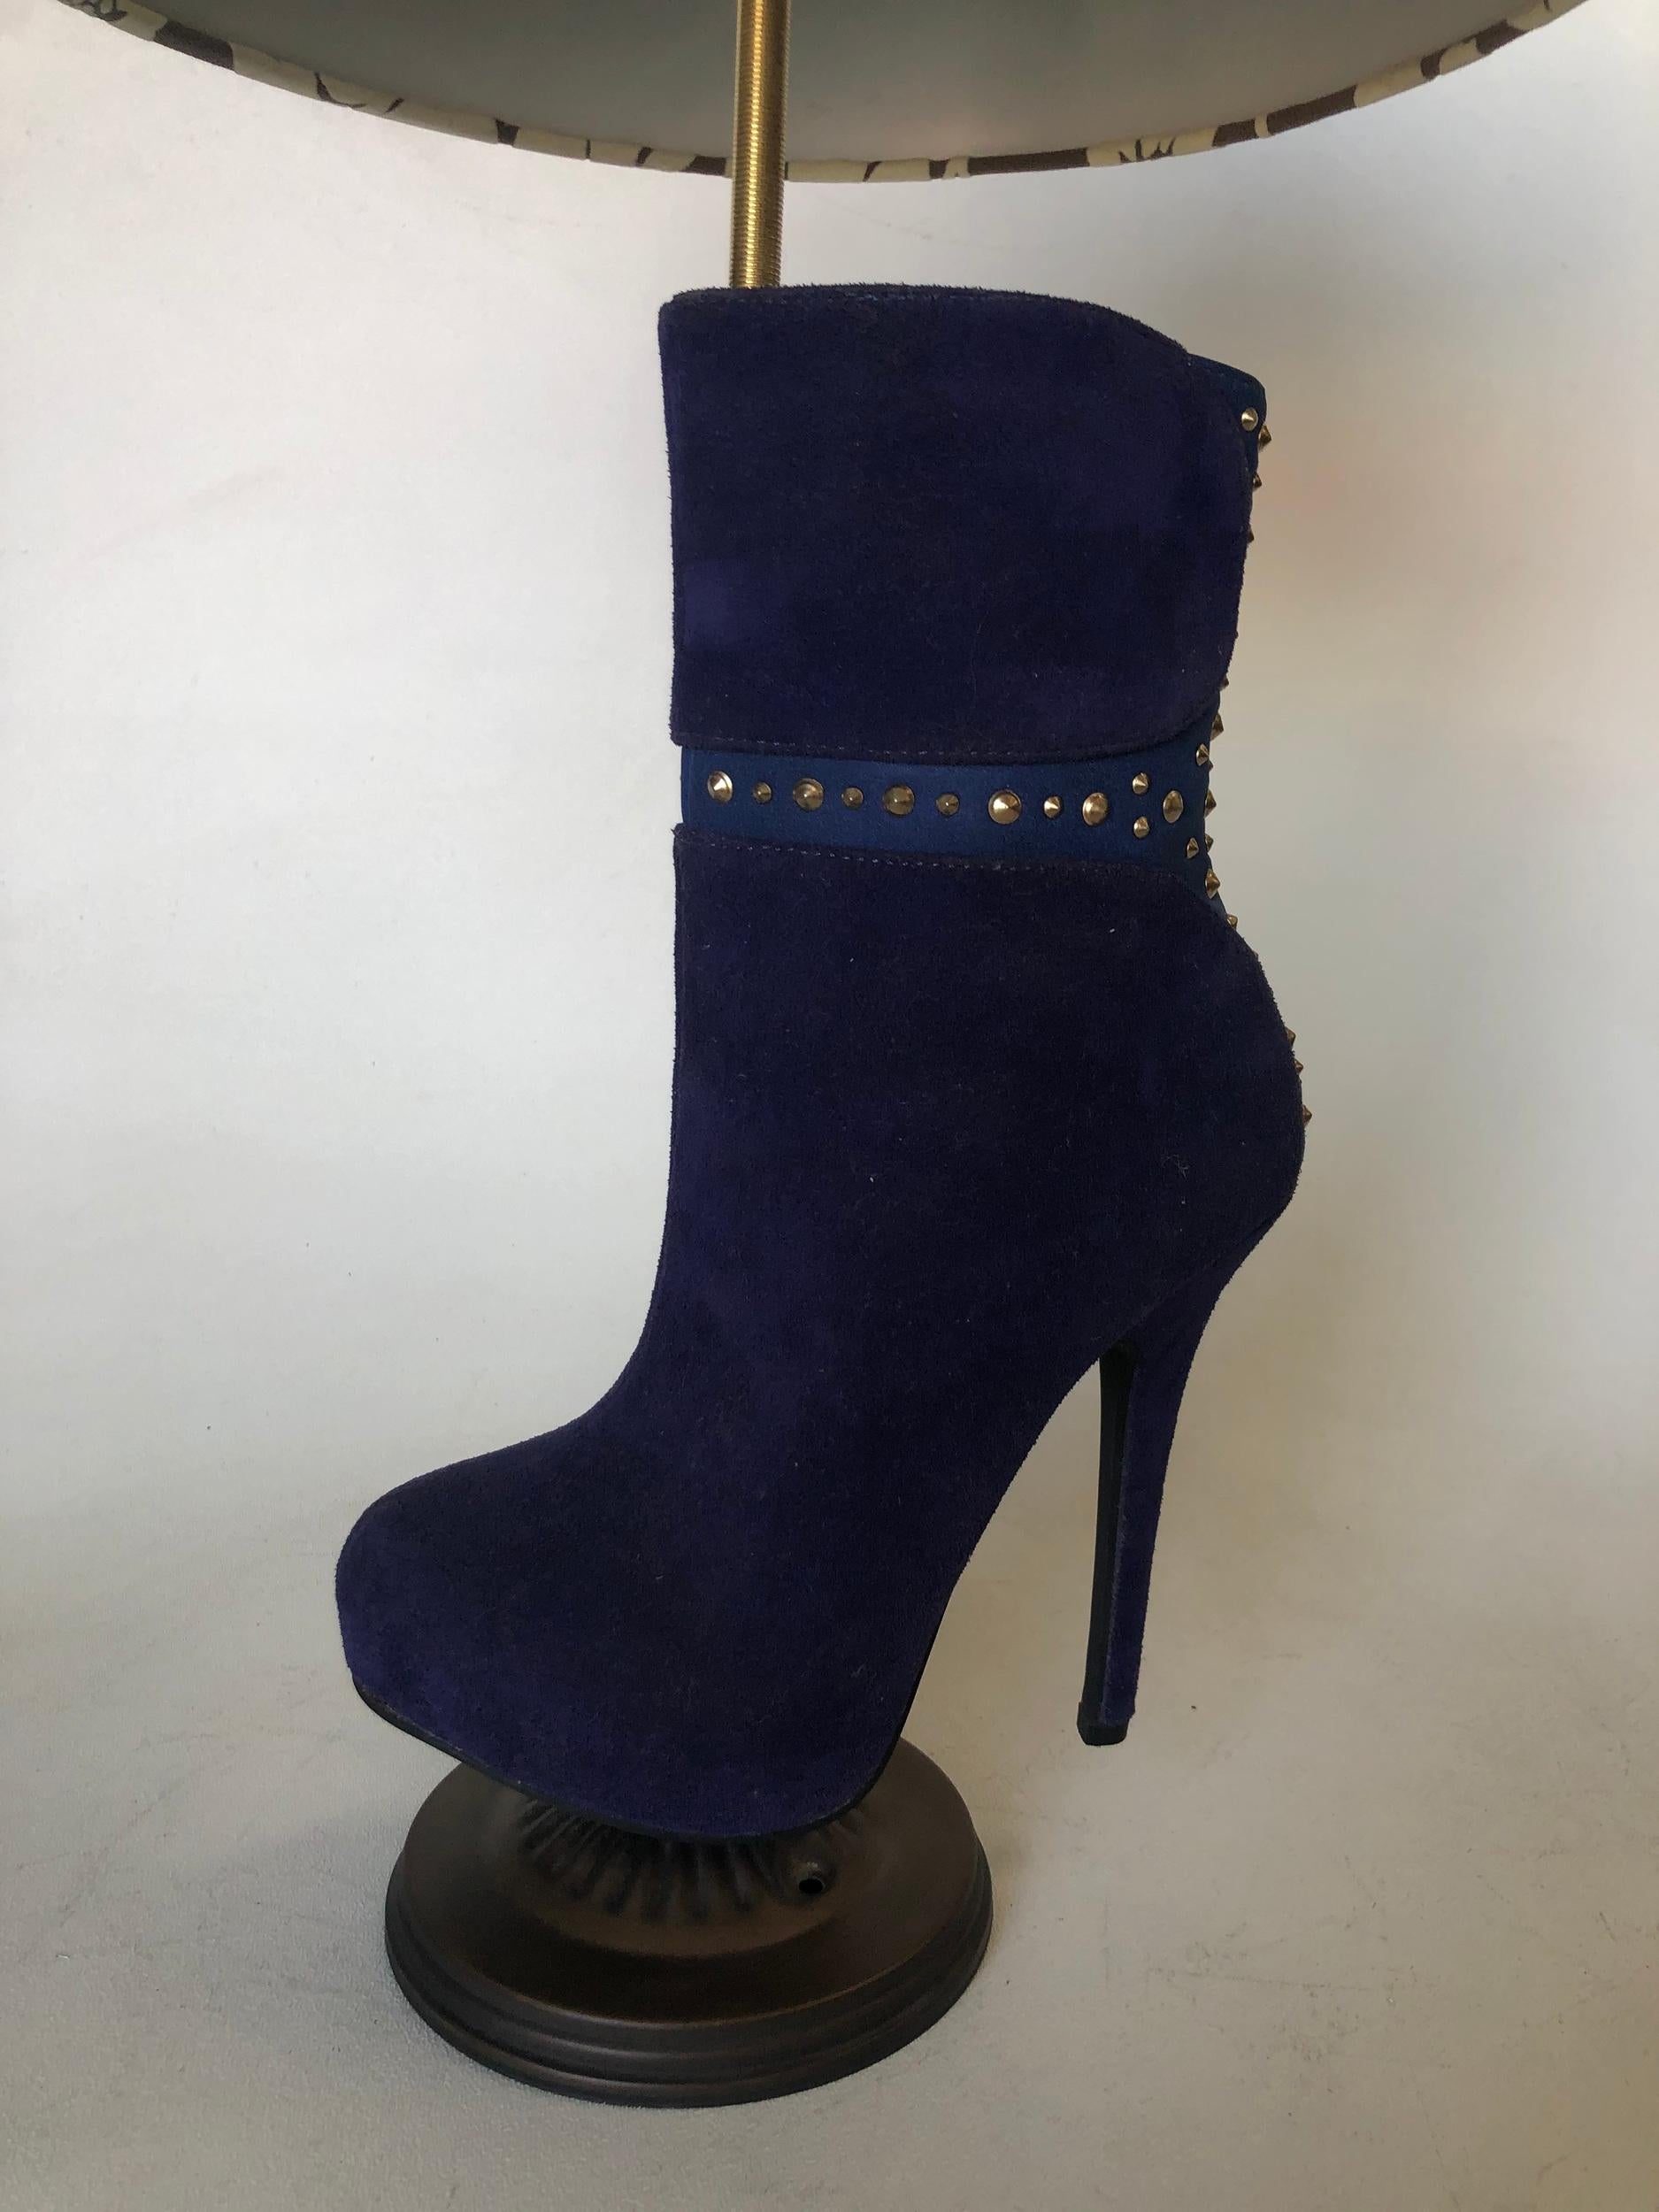 Vintage purple suede stiletto heel boot shoe table lamp with floral lamp shade.

Measures: 25